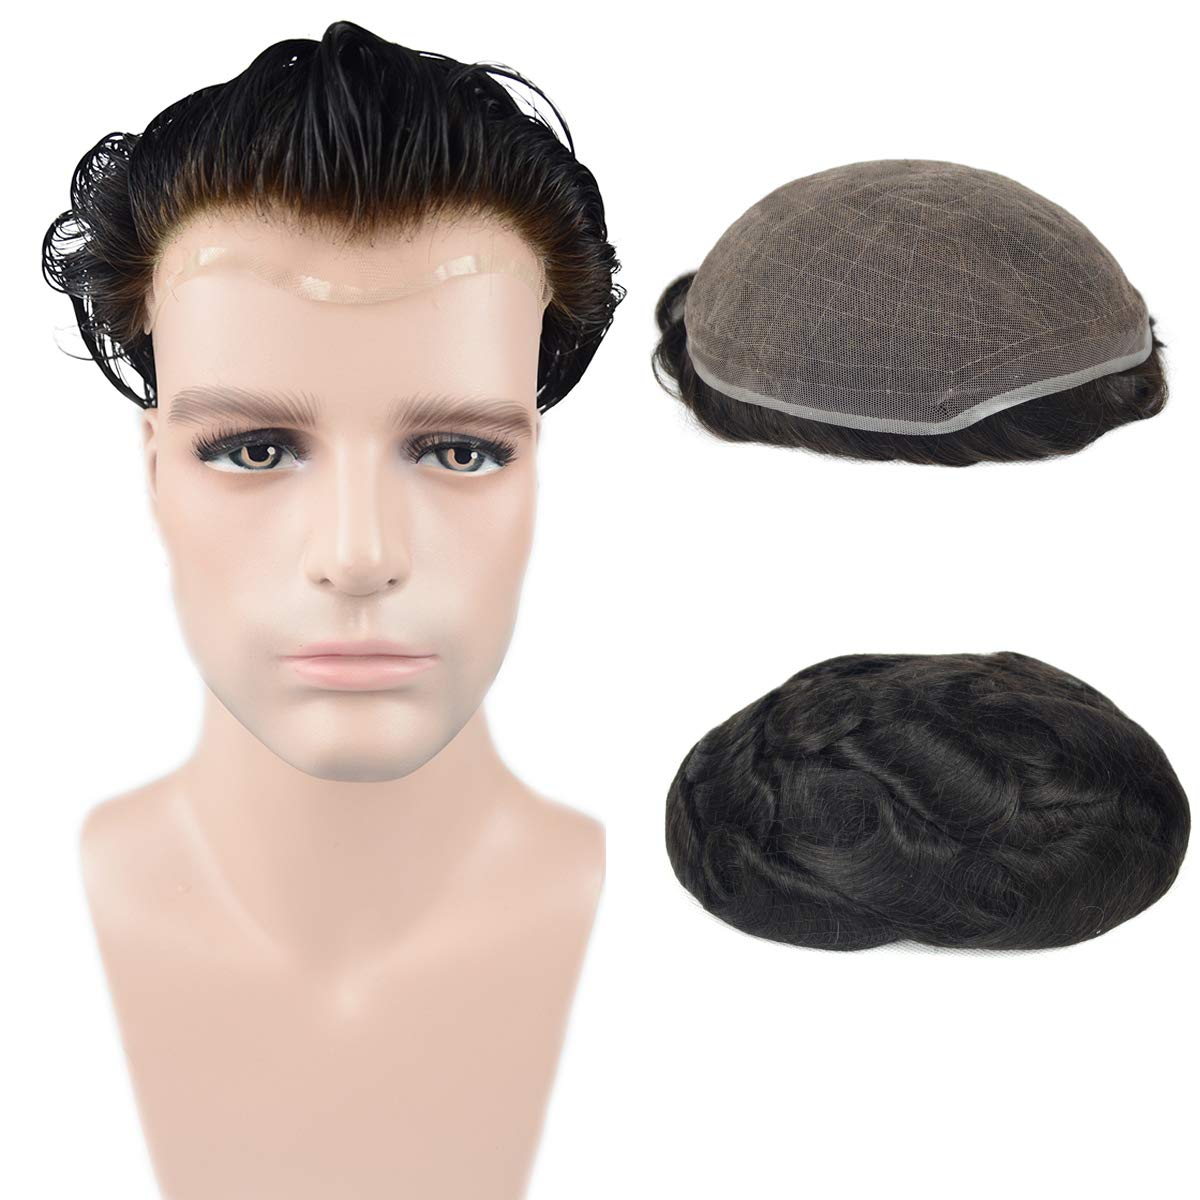 100% Virgin Hair Natural Black Full Lace Base Hairpieces for Men